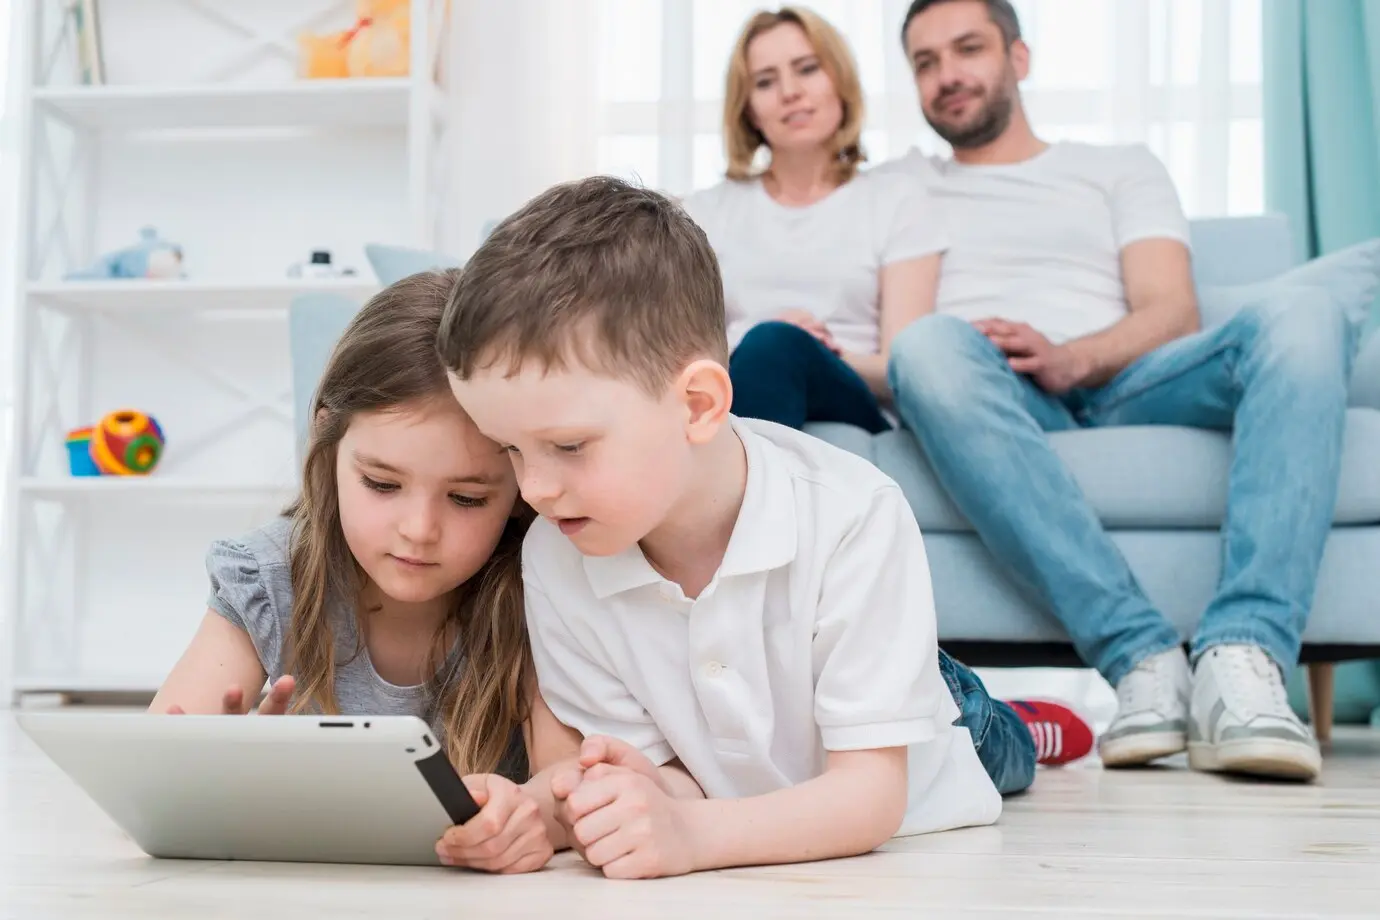 Parents watching children playing with iPad